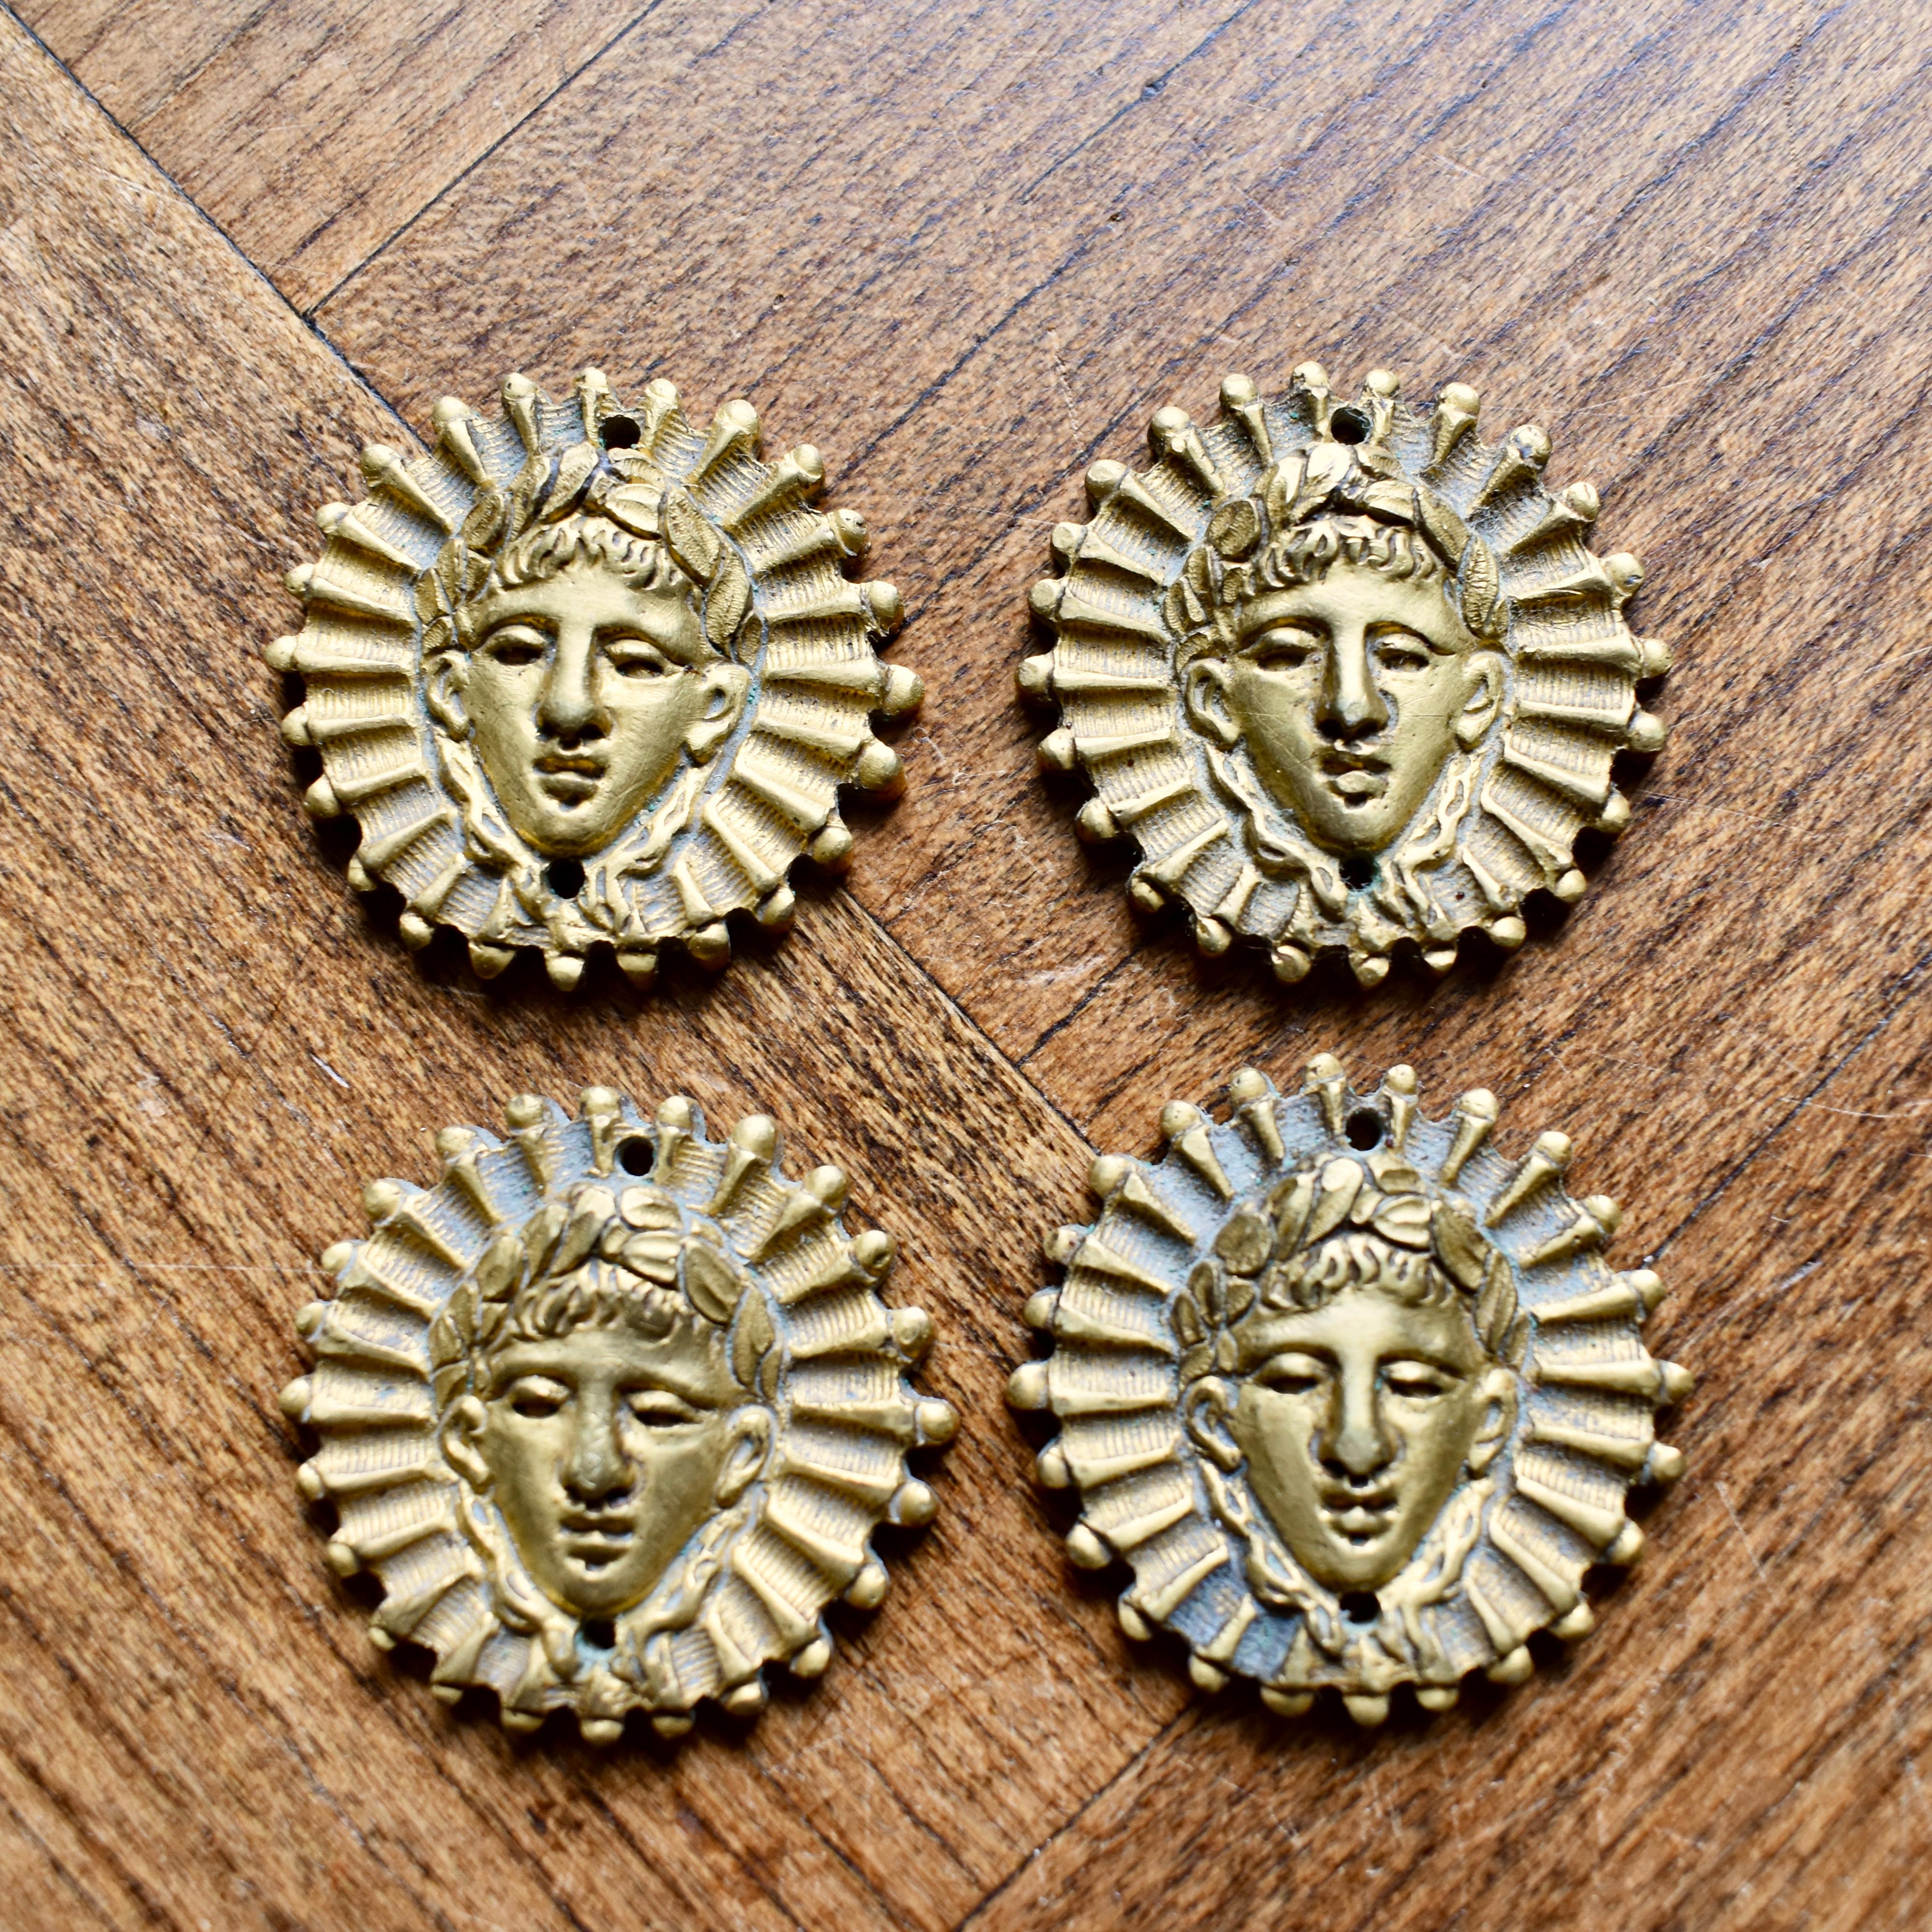 Add an elegant Parisian touch to your decor with this fabulous set of antique French ormolu, Beaux Arts Sun King medallions, circa 1890-1910.

Molded in high relief with the head of Louis XIV, known as Louis le Grand or Roi Soleil, the Sun King.